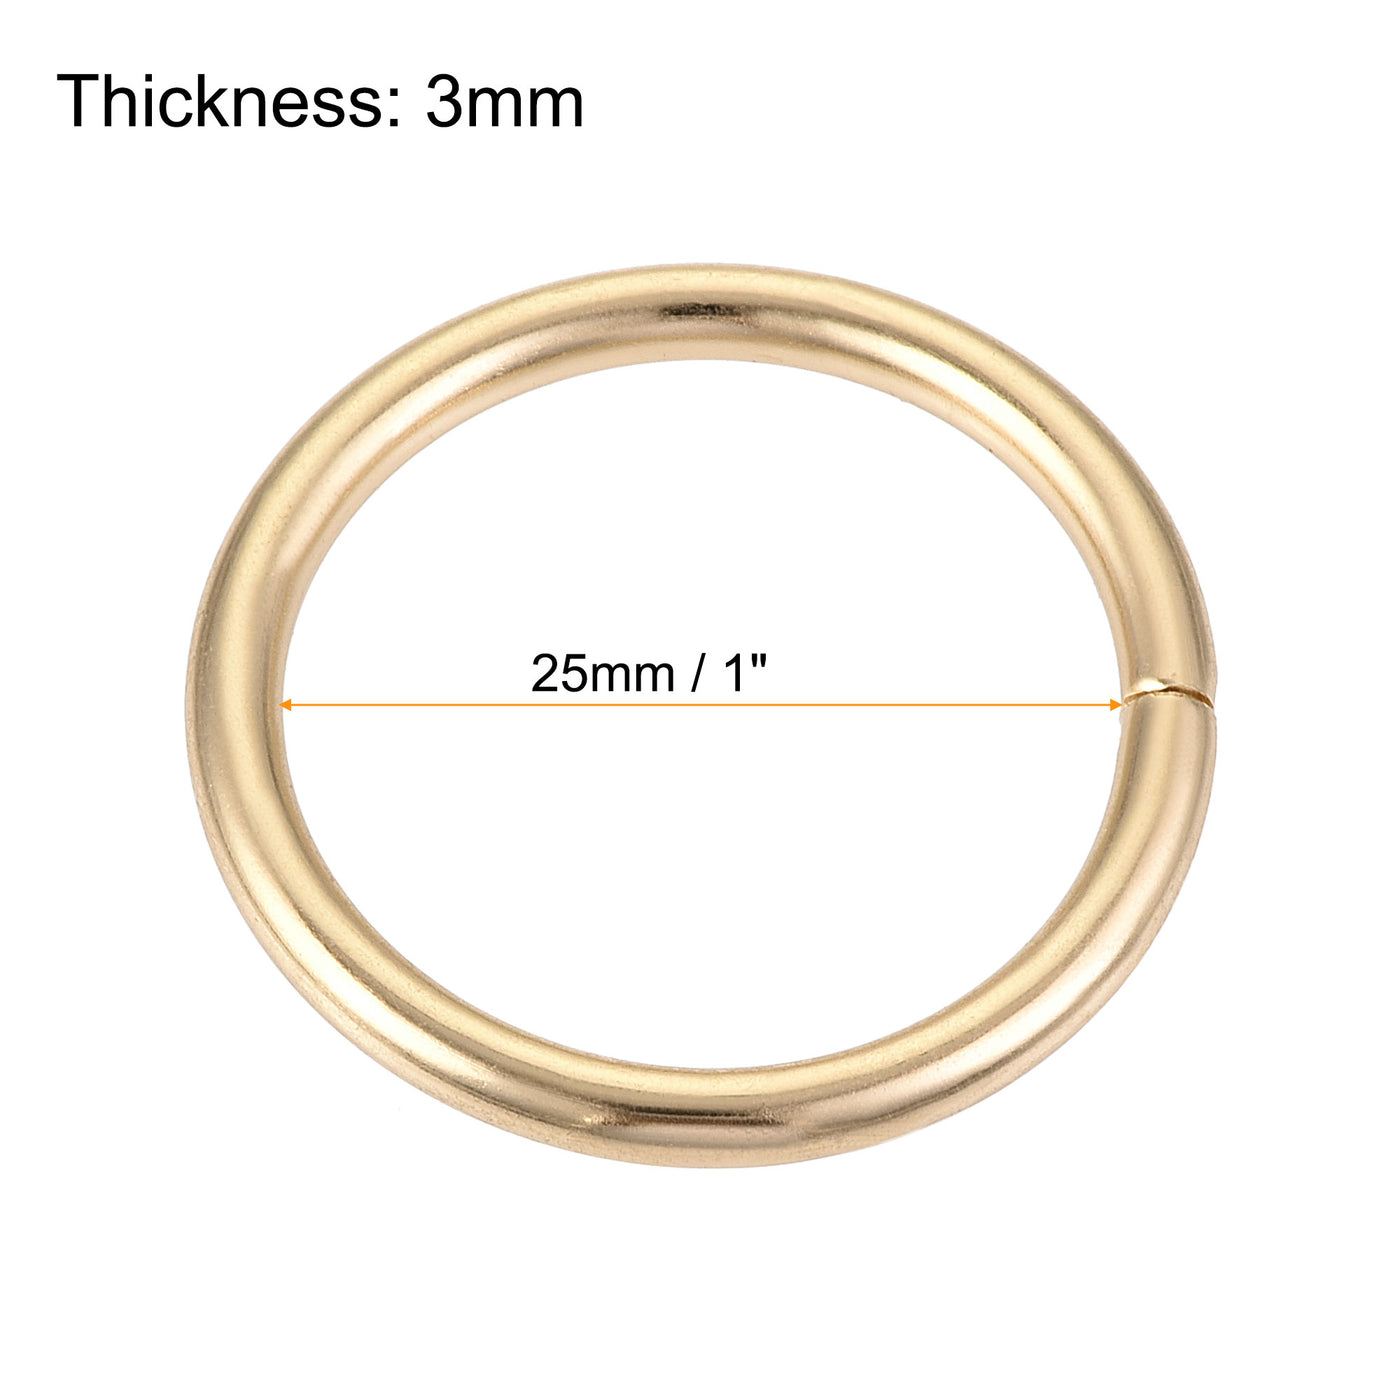 uxcell Uxcell 25mm Metal O Rings Non-Welded for Straps Bags Belts DIY Gold Tone 20pcs